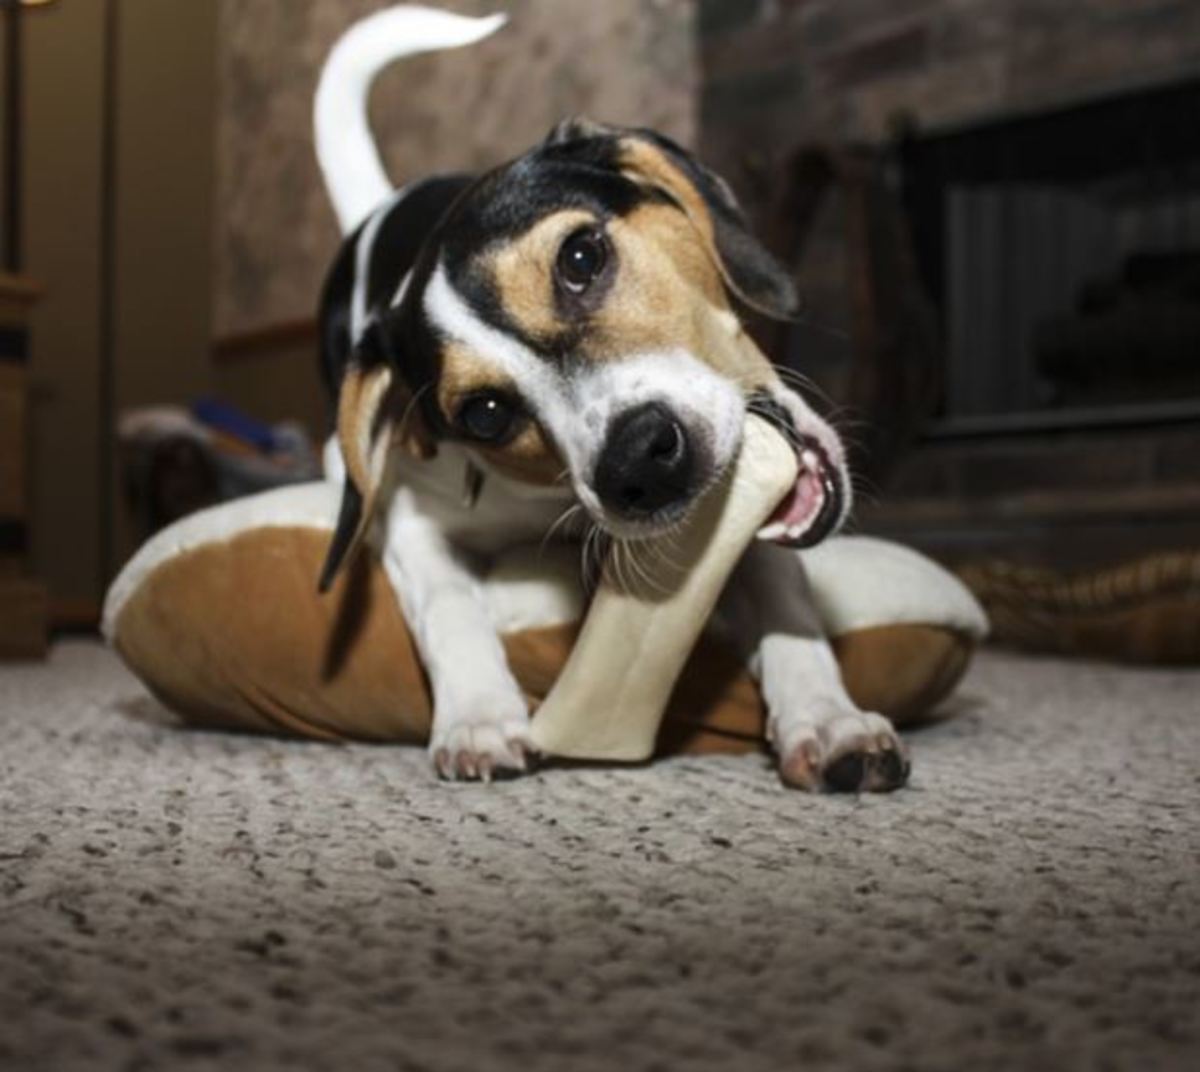 The dog may initially resource guard a distinct stimulus such as a toy, food, a bone, or a person. 